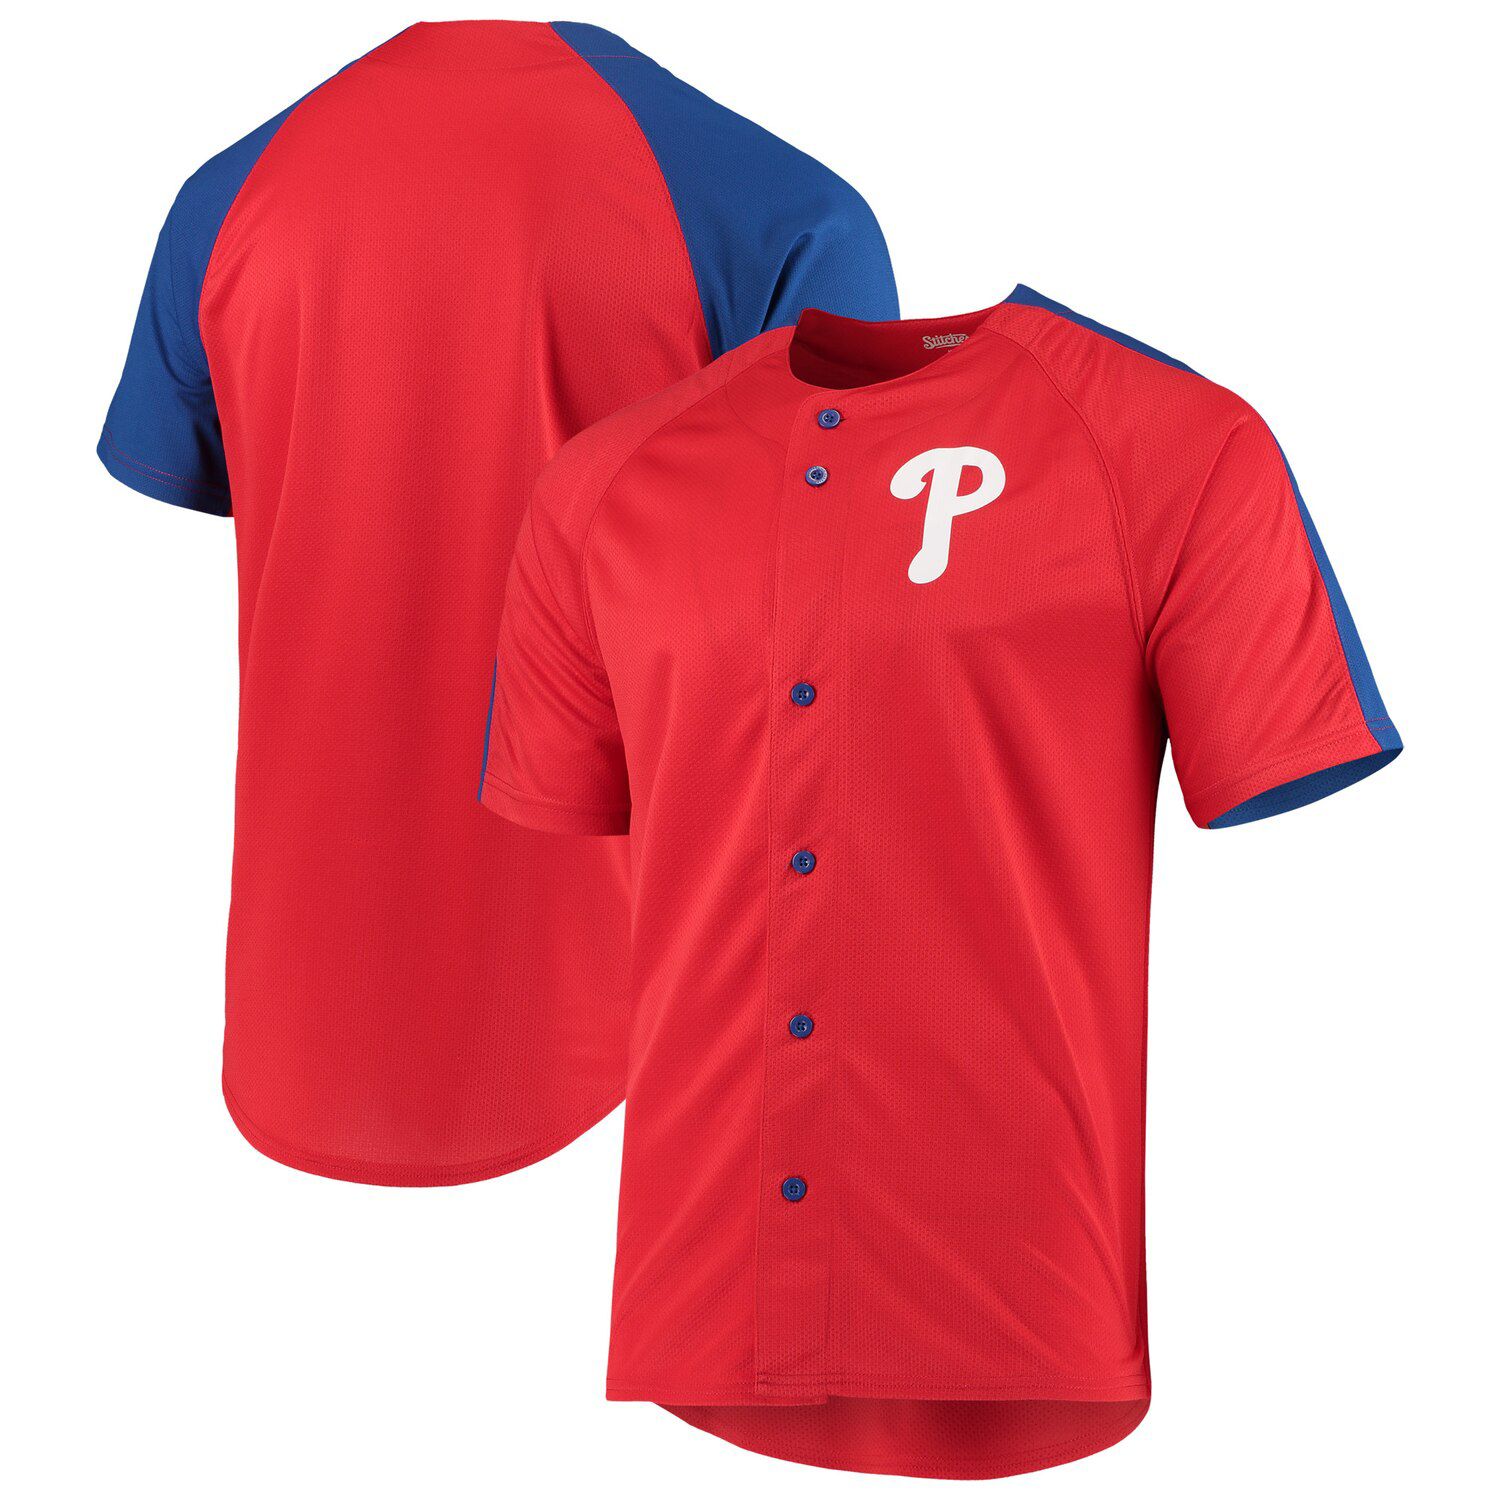 phillies jersey red